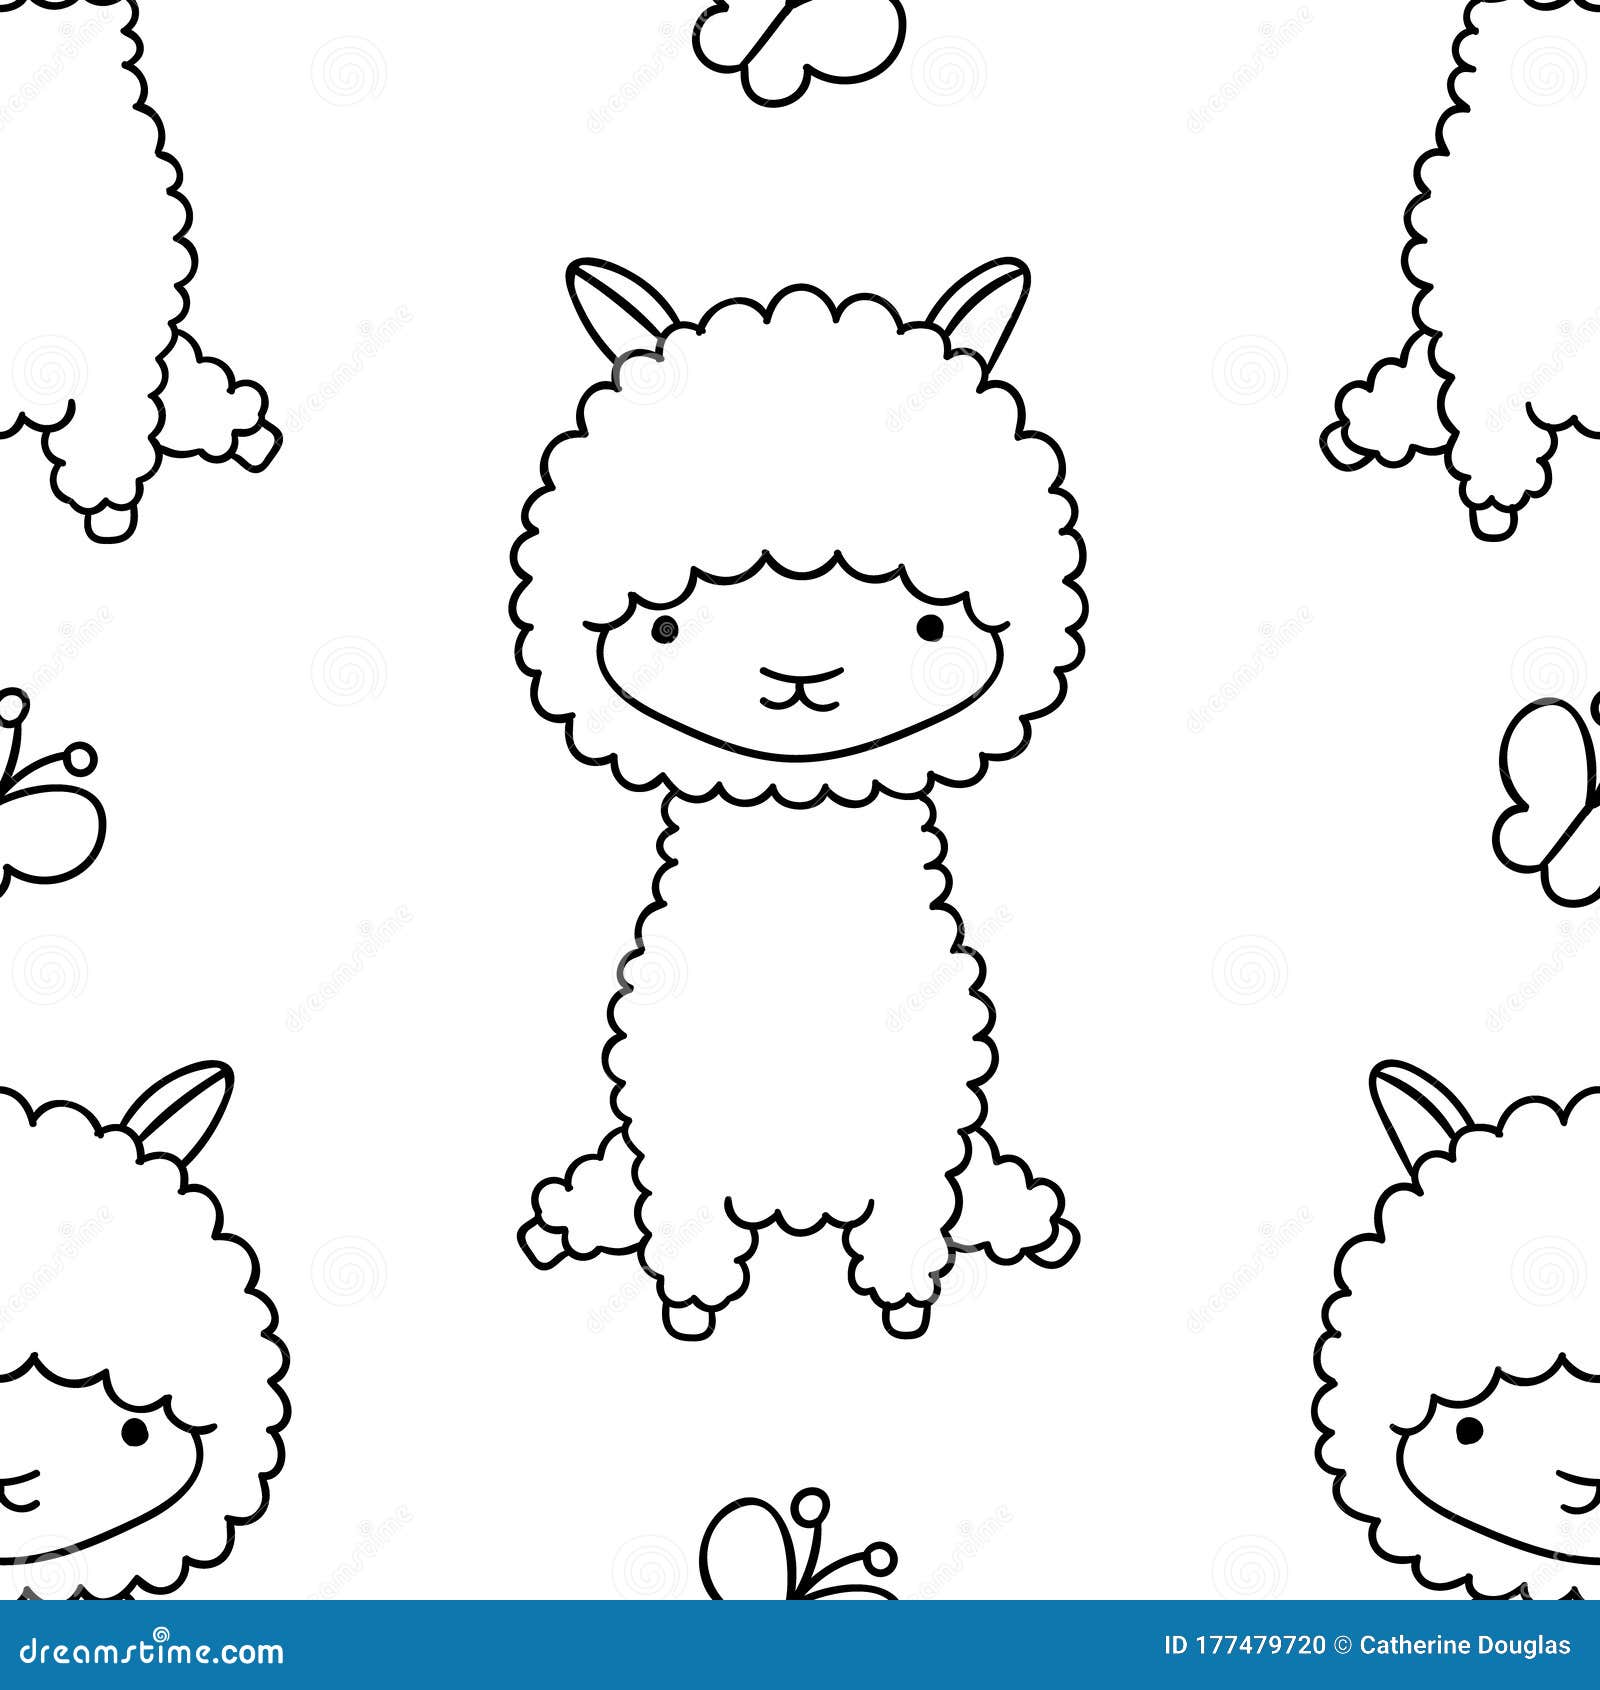 Download Simple Seamless Pattern, Black And White Cute Kawaii Hand Drawn Llama Doodles, Coloring Pages ...